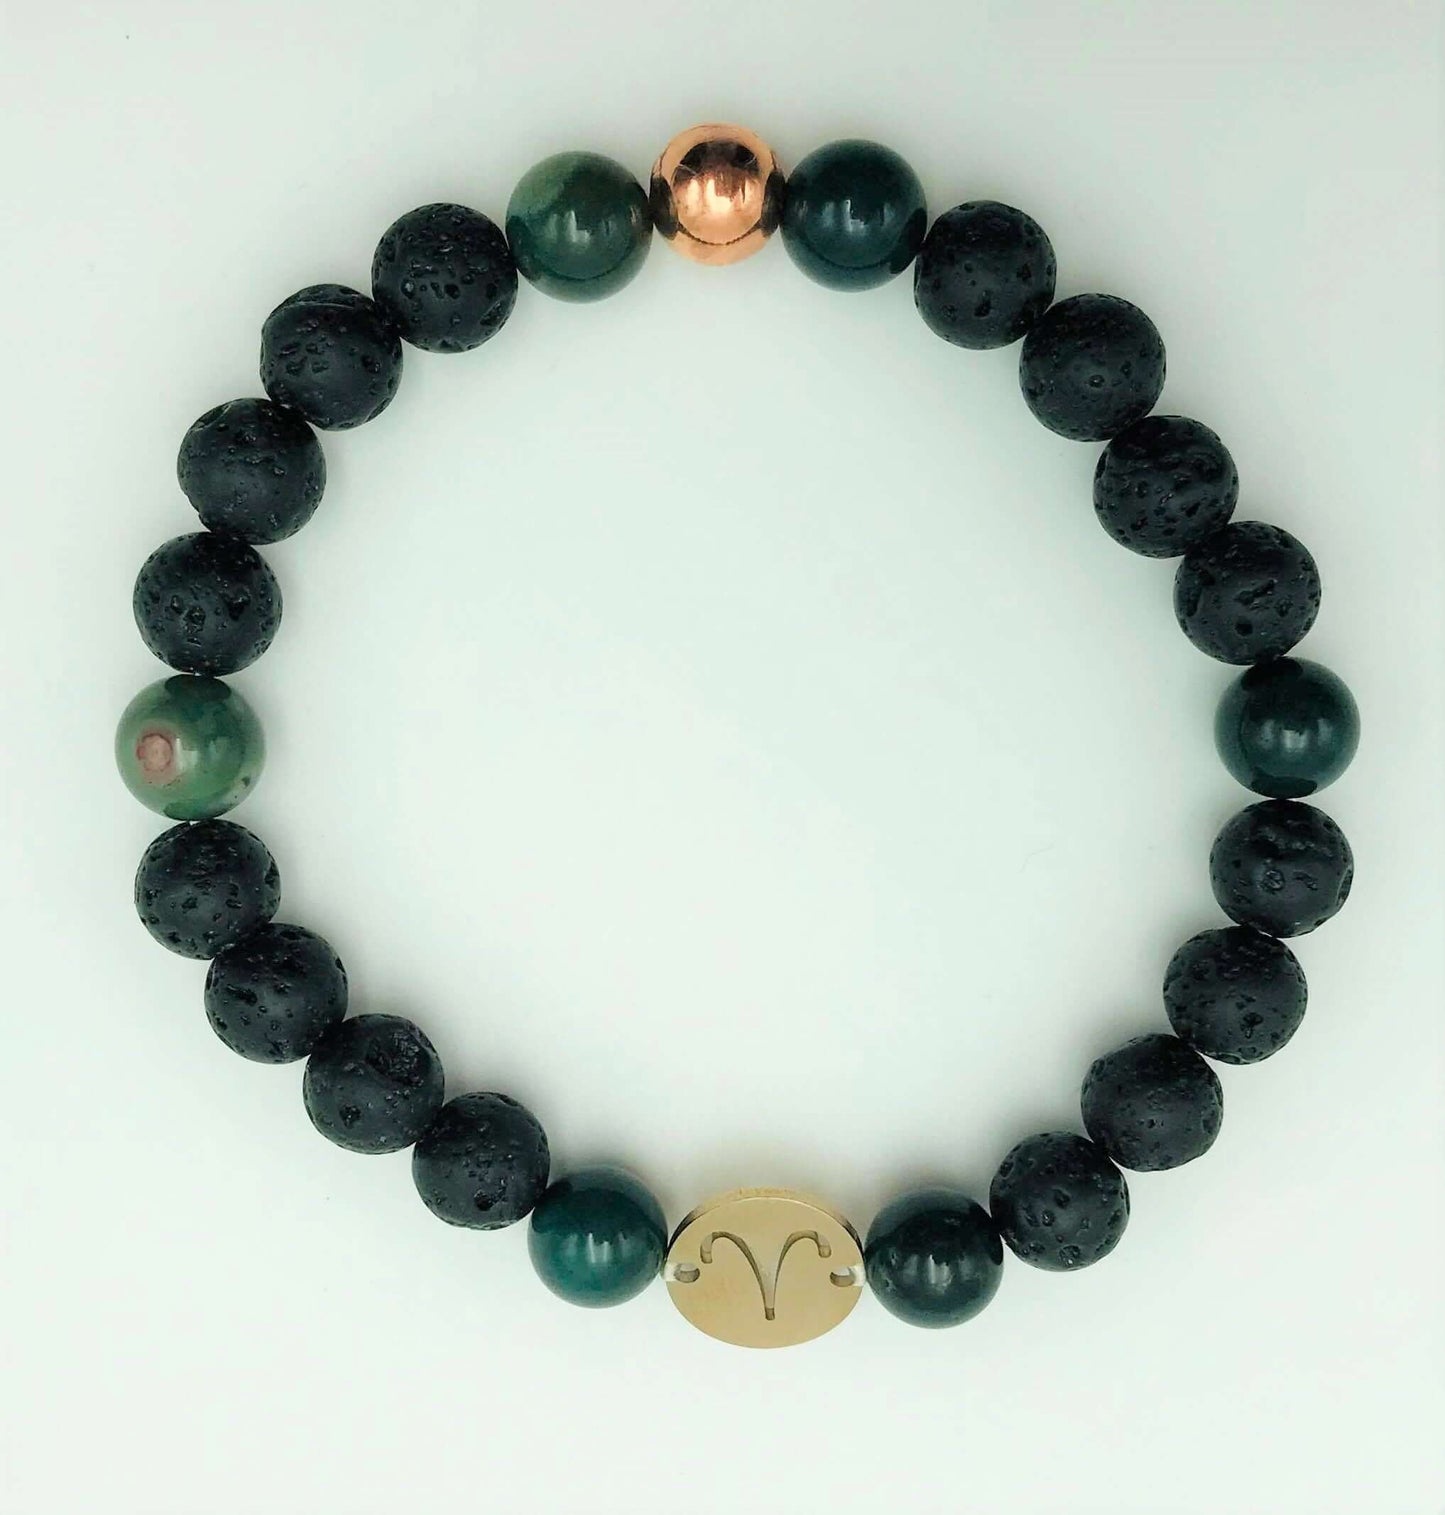 Aries (Mar 21 - Apr 19) bracelet and bracelet & oil set at $10 only from Spiral Rain